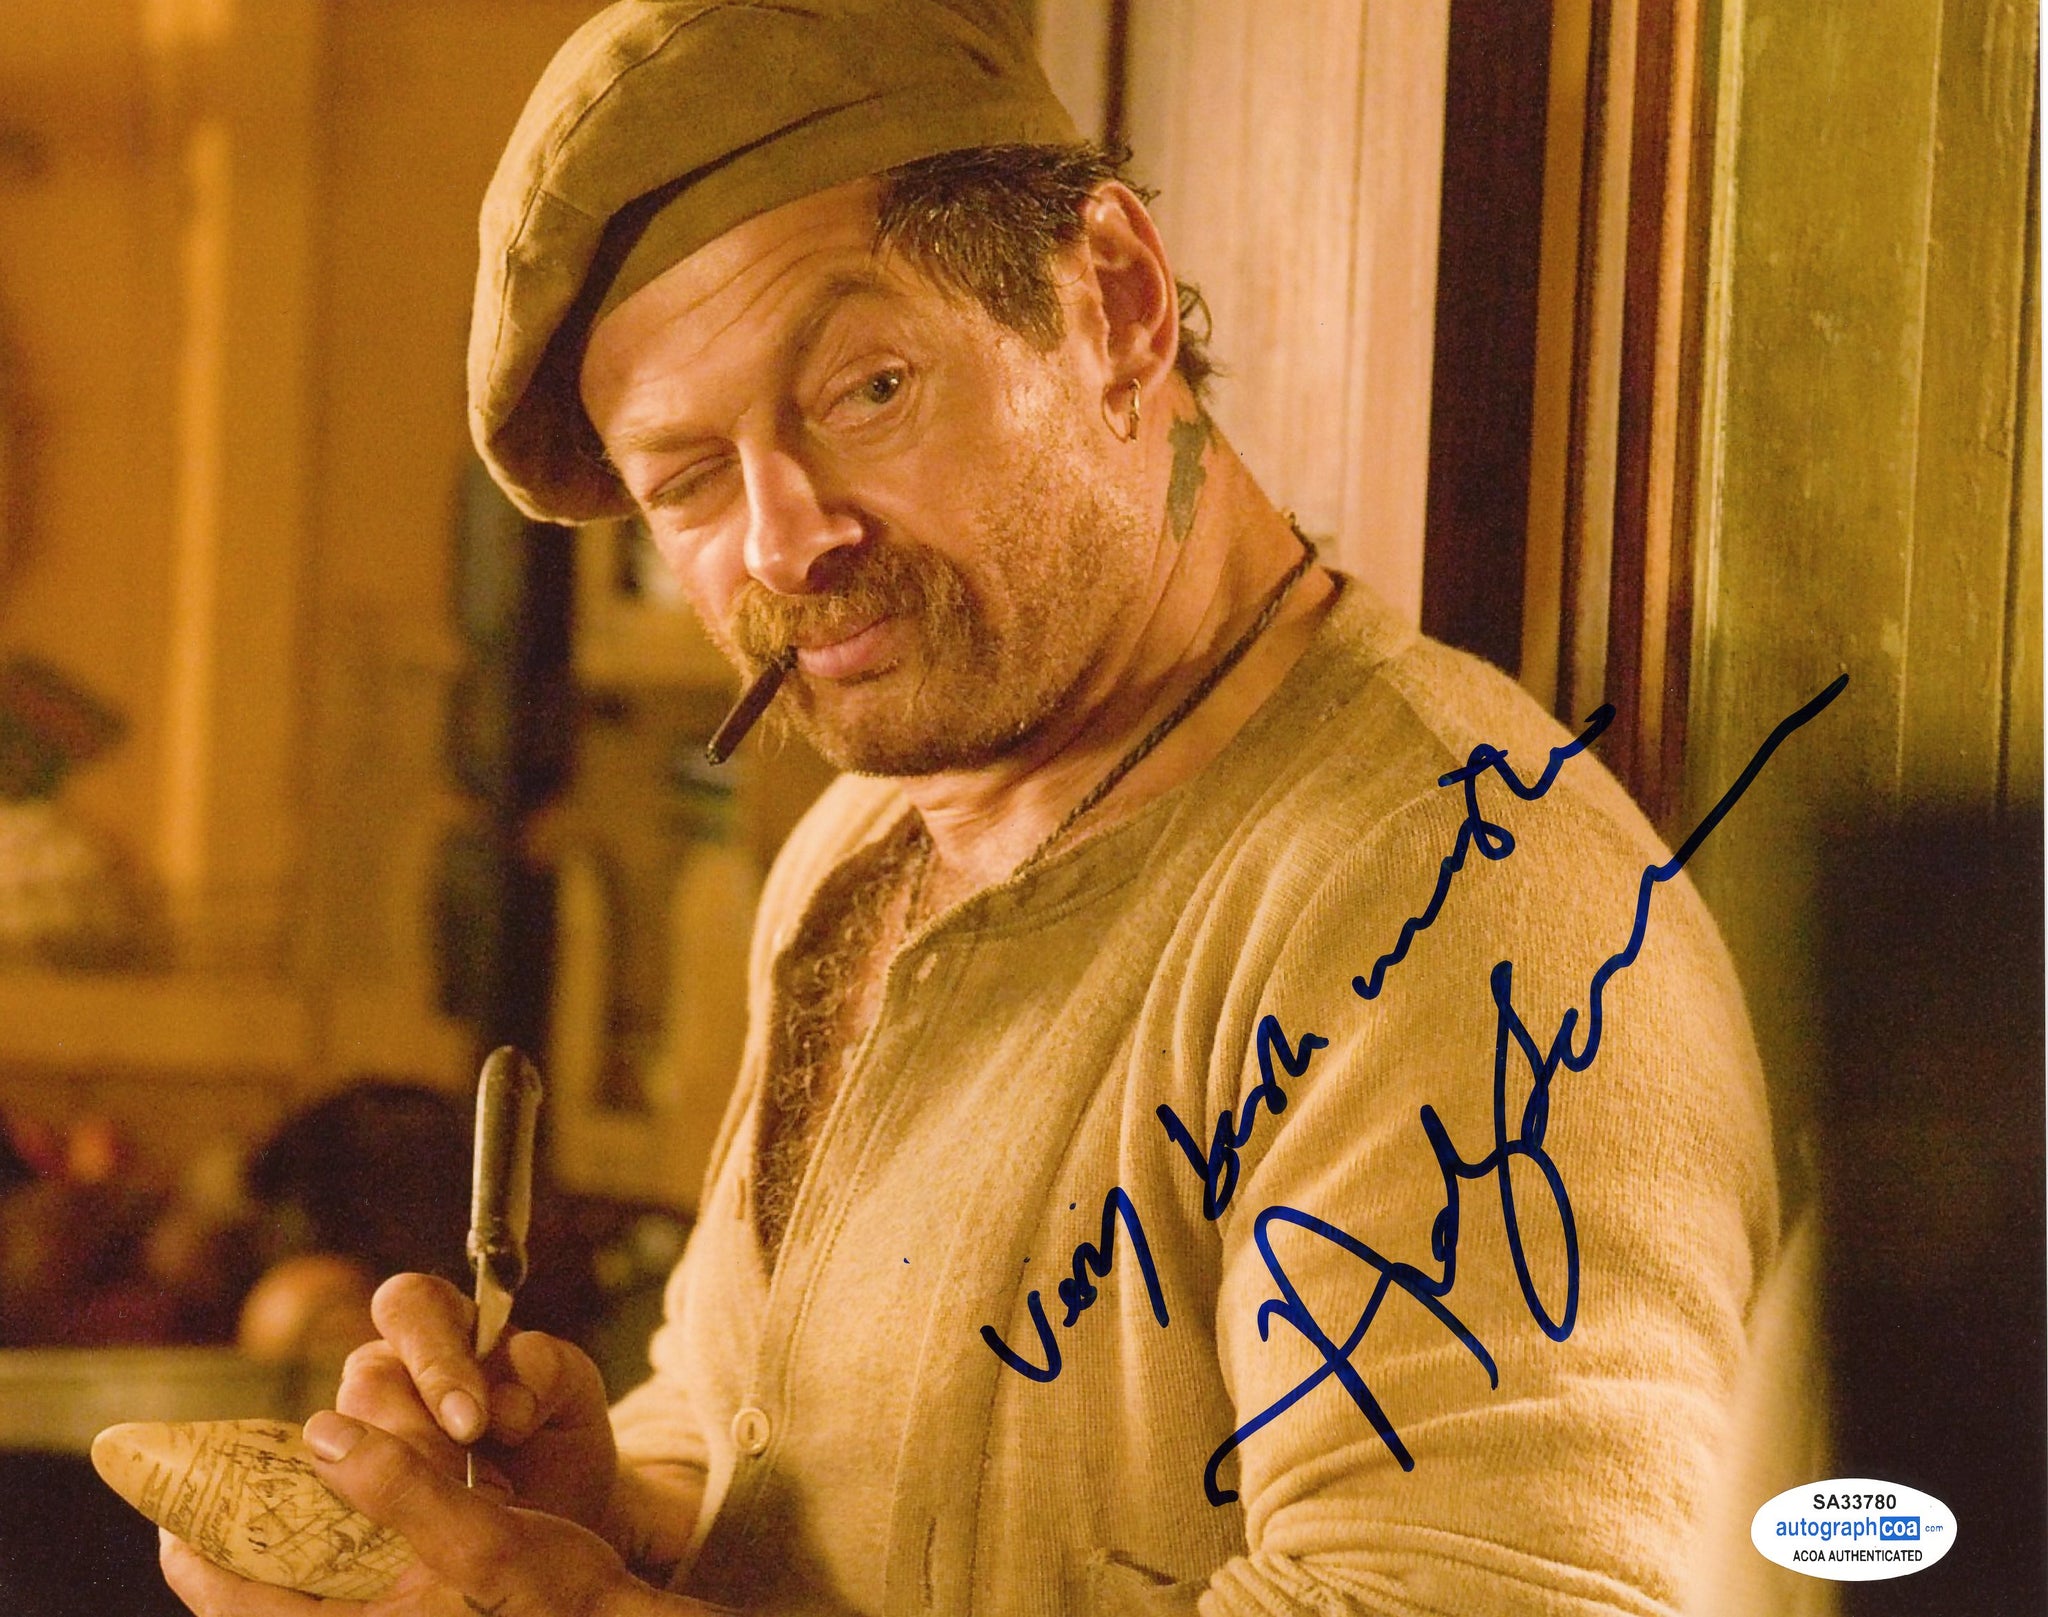 Andy Serkis Tintin Signed Autograph 8x10 Photo ACOA #9 - Outlaw Hobbies Authentic Autographs